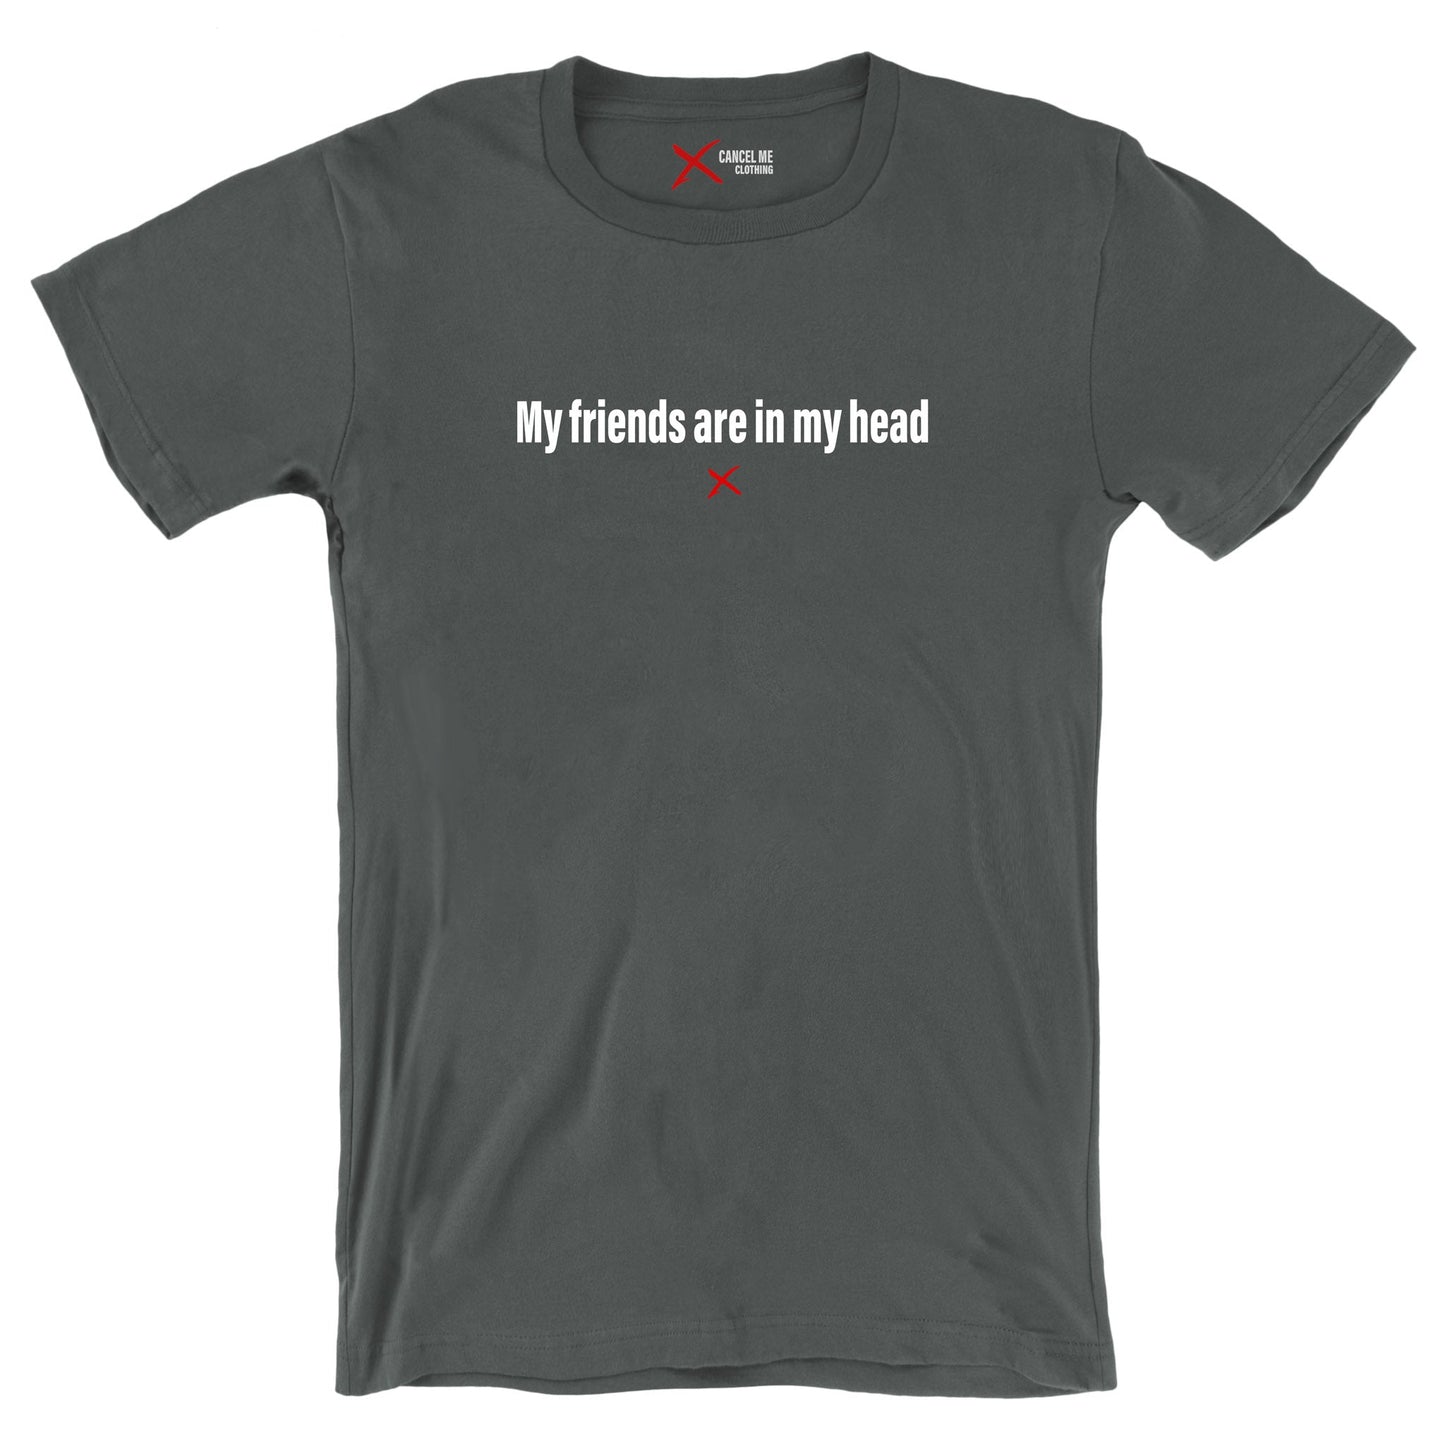 My friends are in my head - Shirt